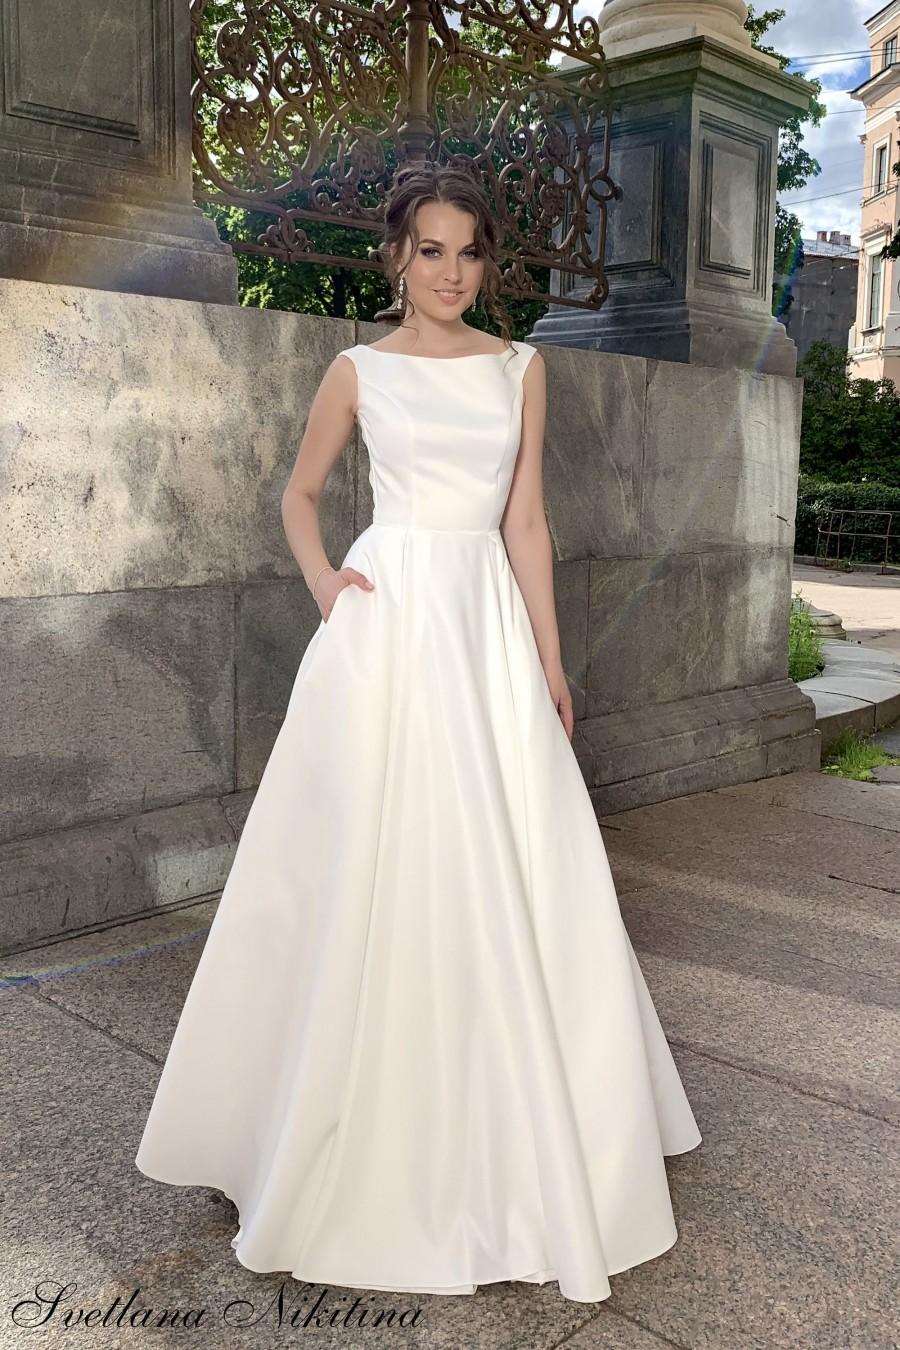 Best Simple Satin Wedding Dress of the decade Don t miss out 